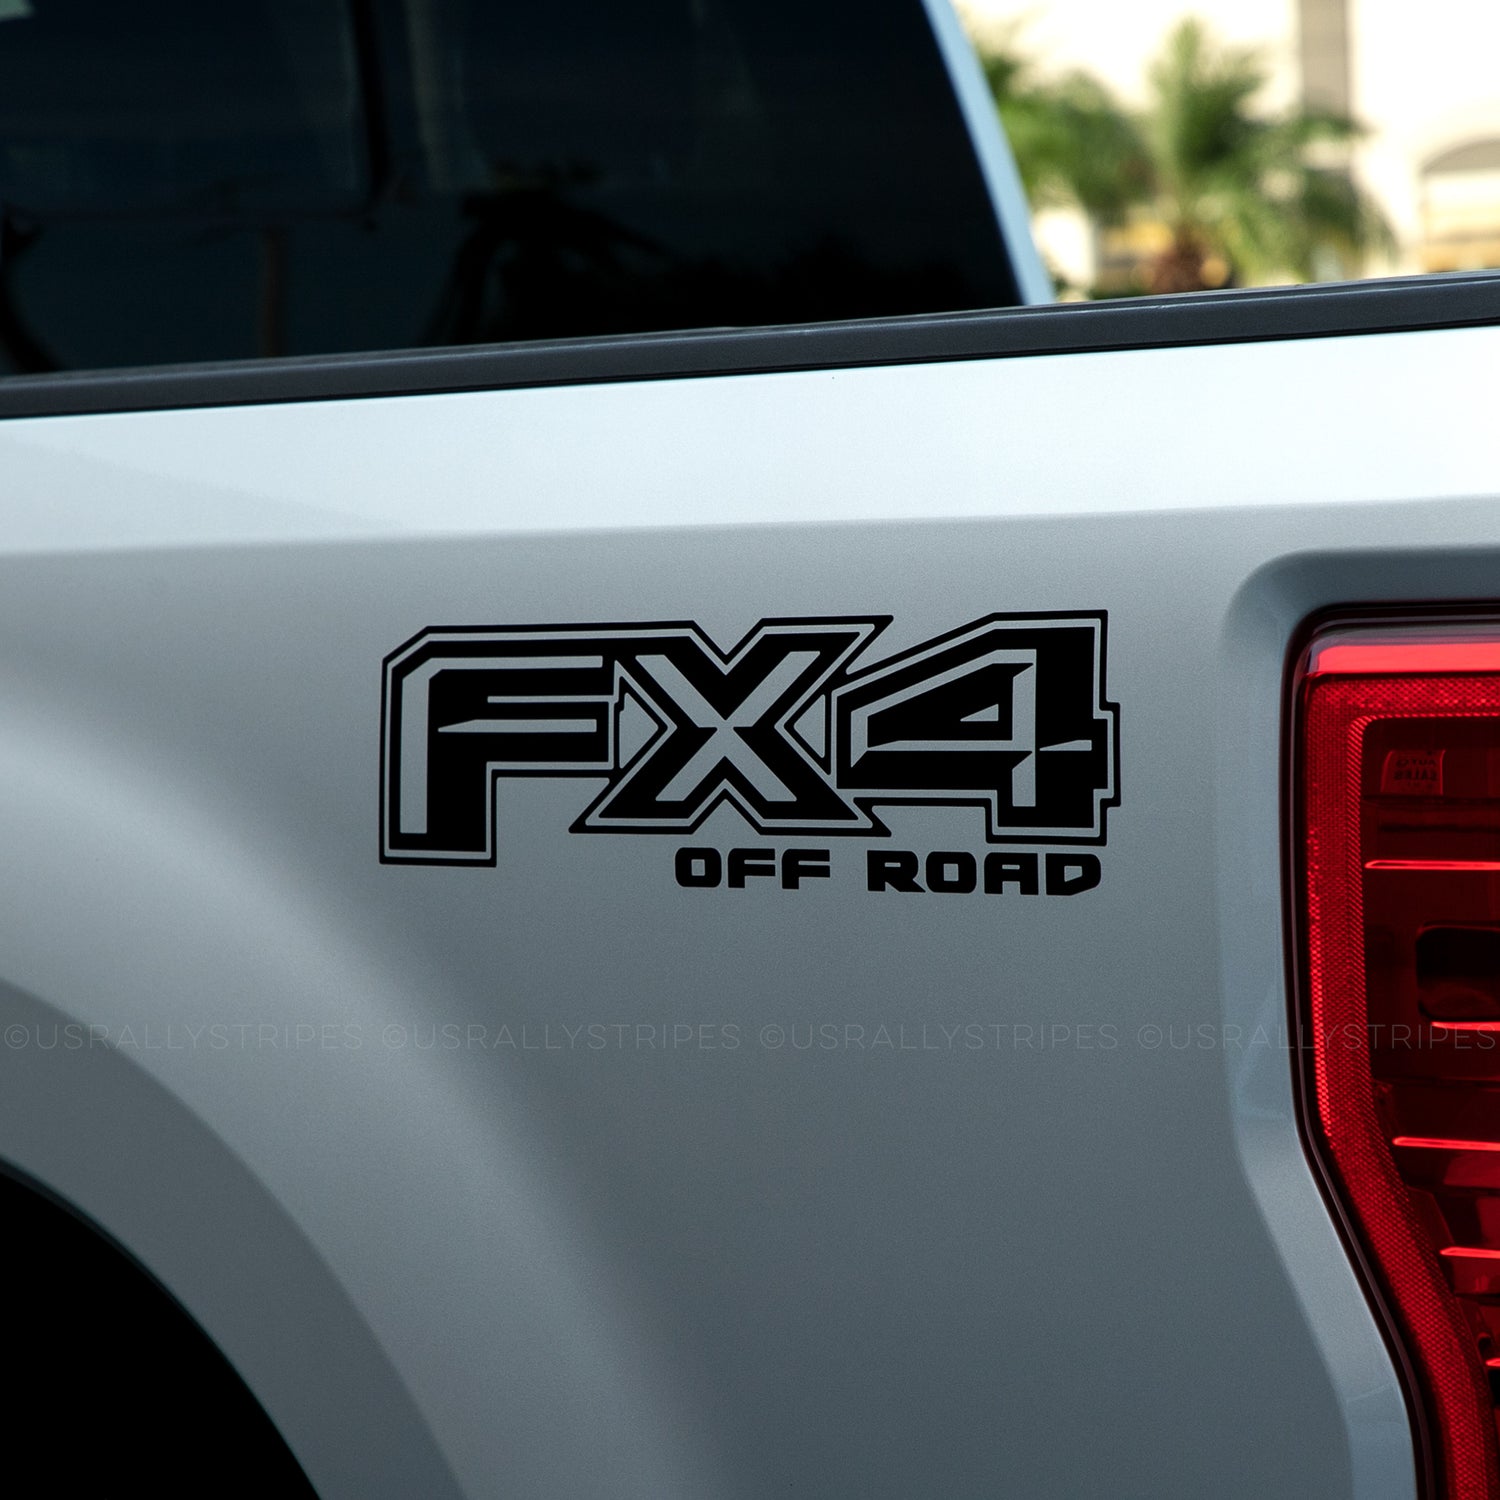 FX4 off-road black vinyl decal Ford F-150 side view